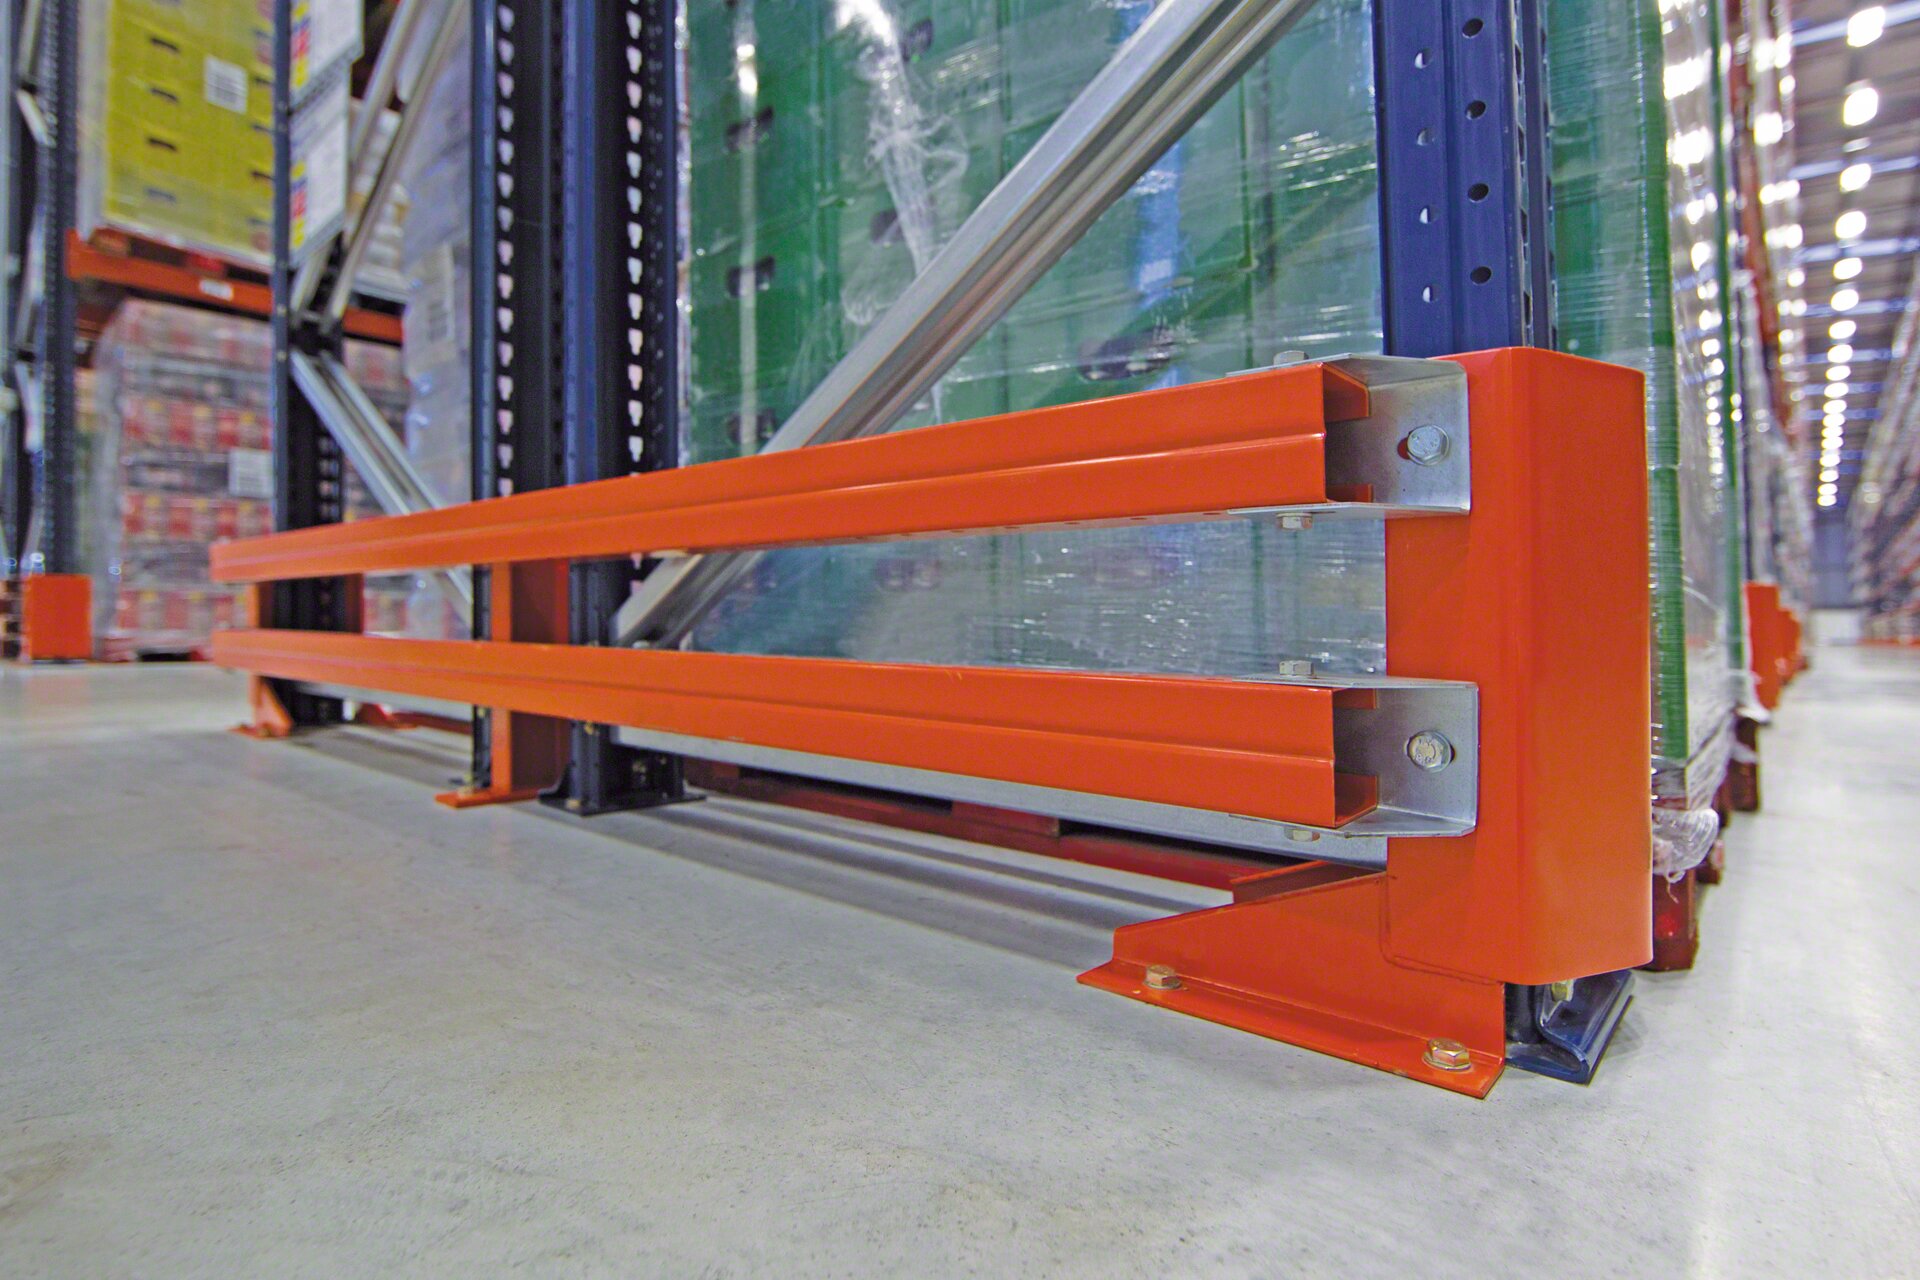 Protectors absorb minor impacts and safeguard the pallet racking